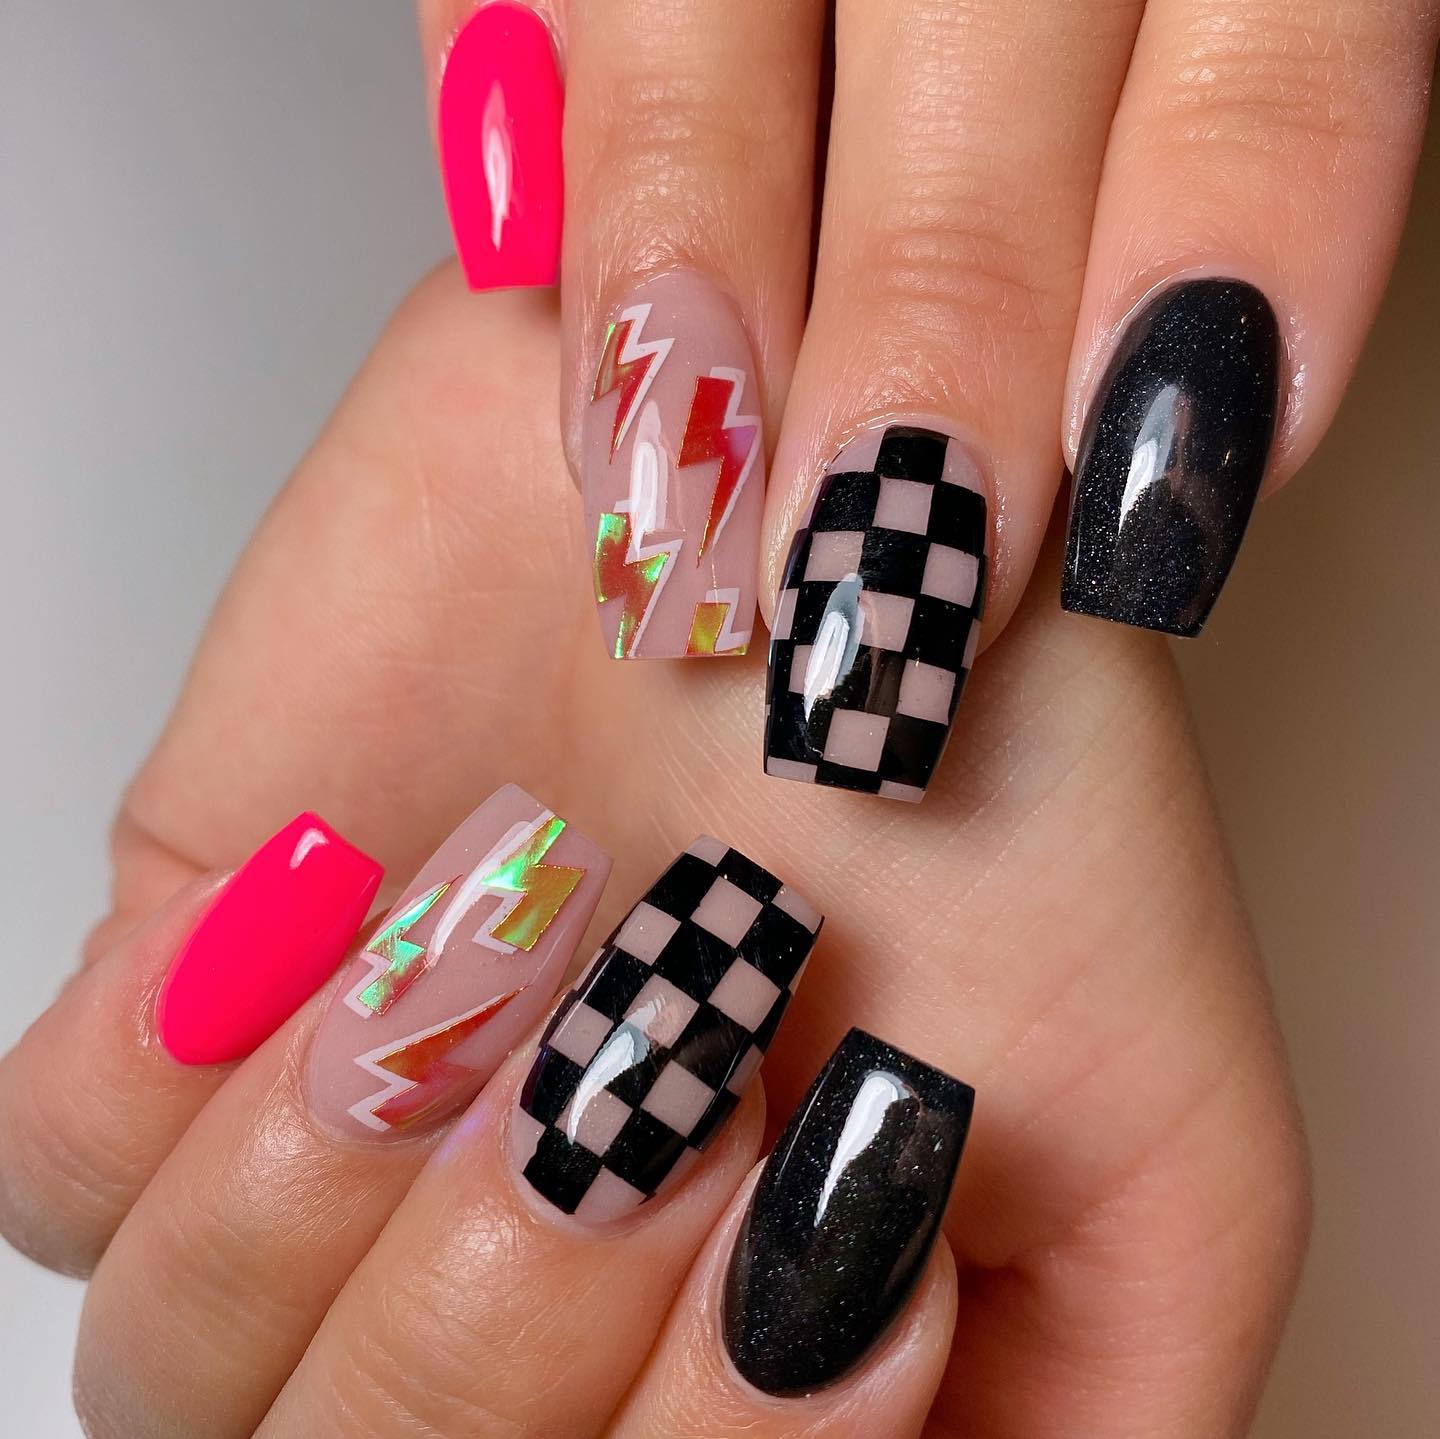 A mixture of bright lightning bolts, neon pink, dama and glittered black nails. Wow. It's for those who want to catch everyone's attention.